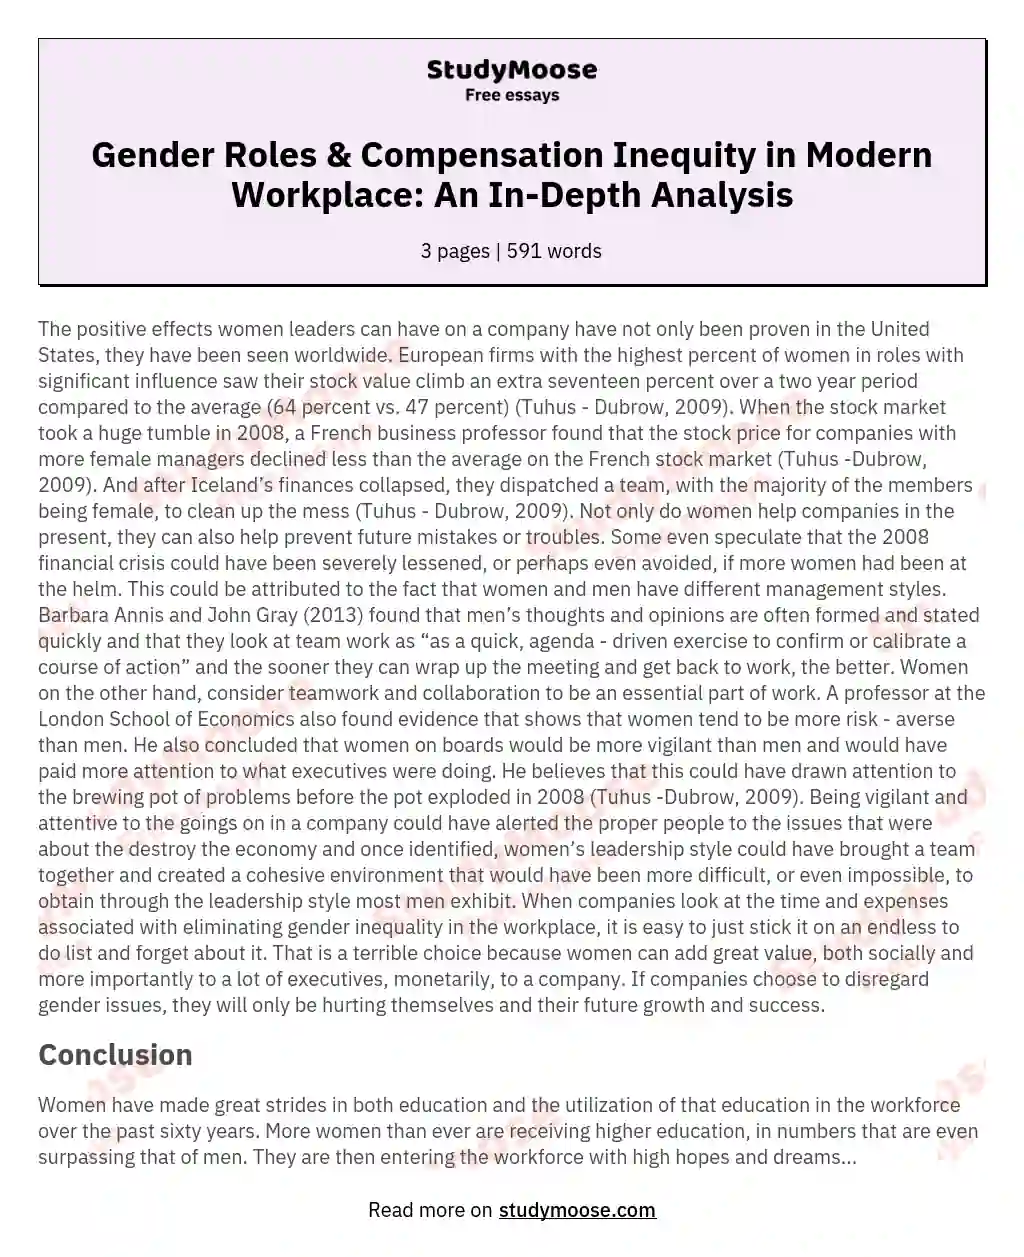 Gender Roles & Compensation Inequity in Modern Workplace: An In-Depth Analysis essay